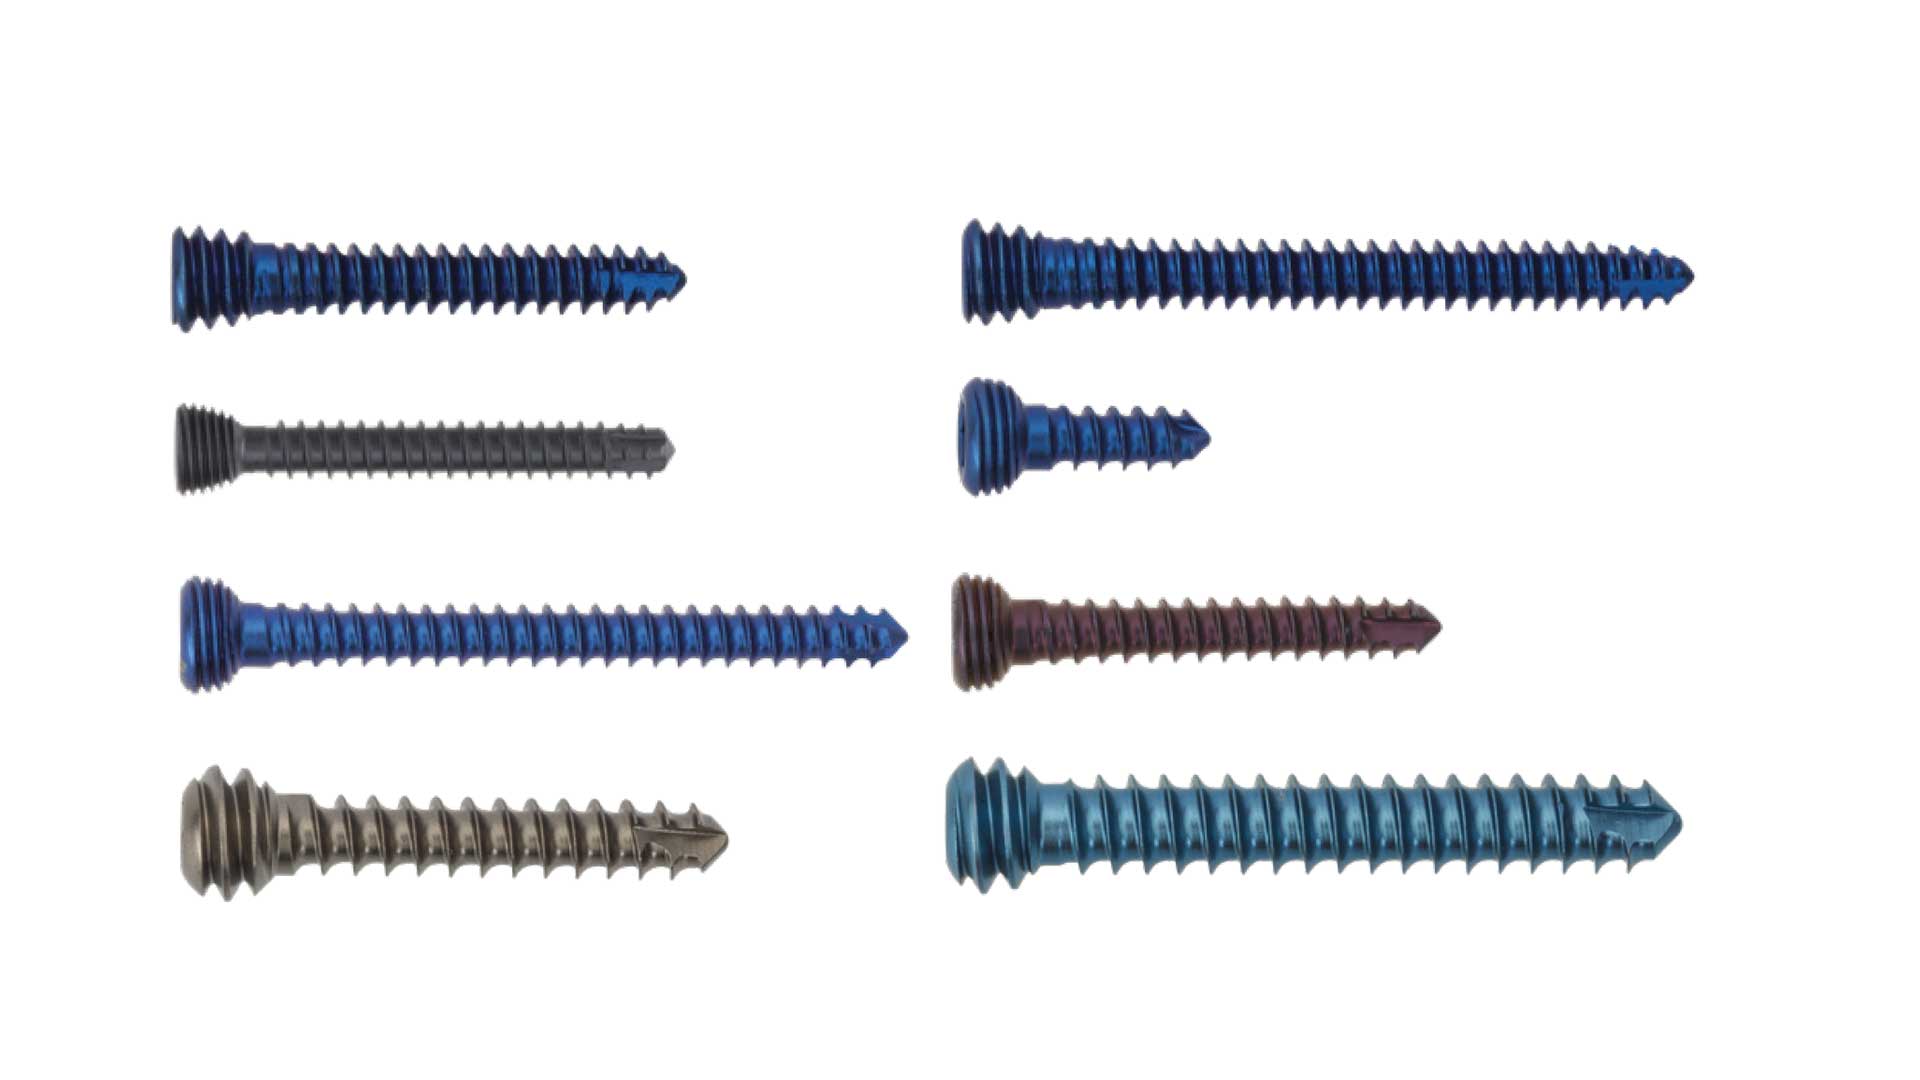 Königsee Implantate Products: Cortical screw angle-stable; titanium, category Screws